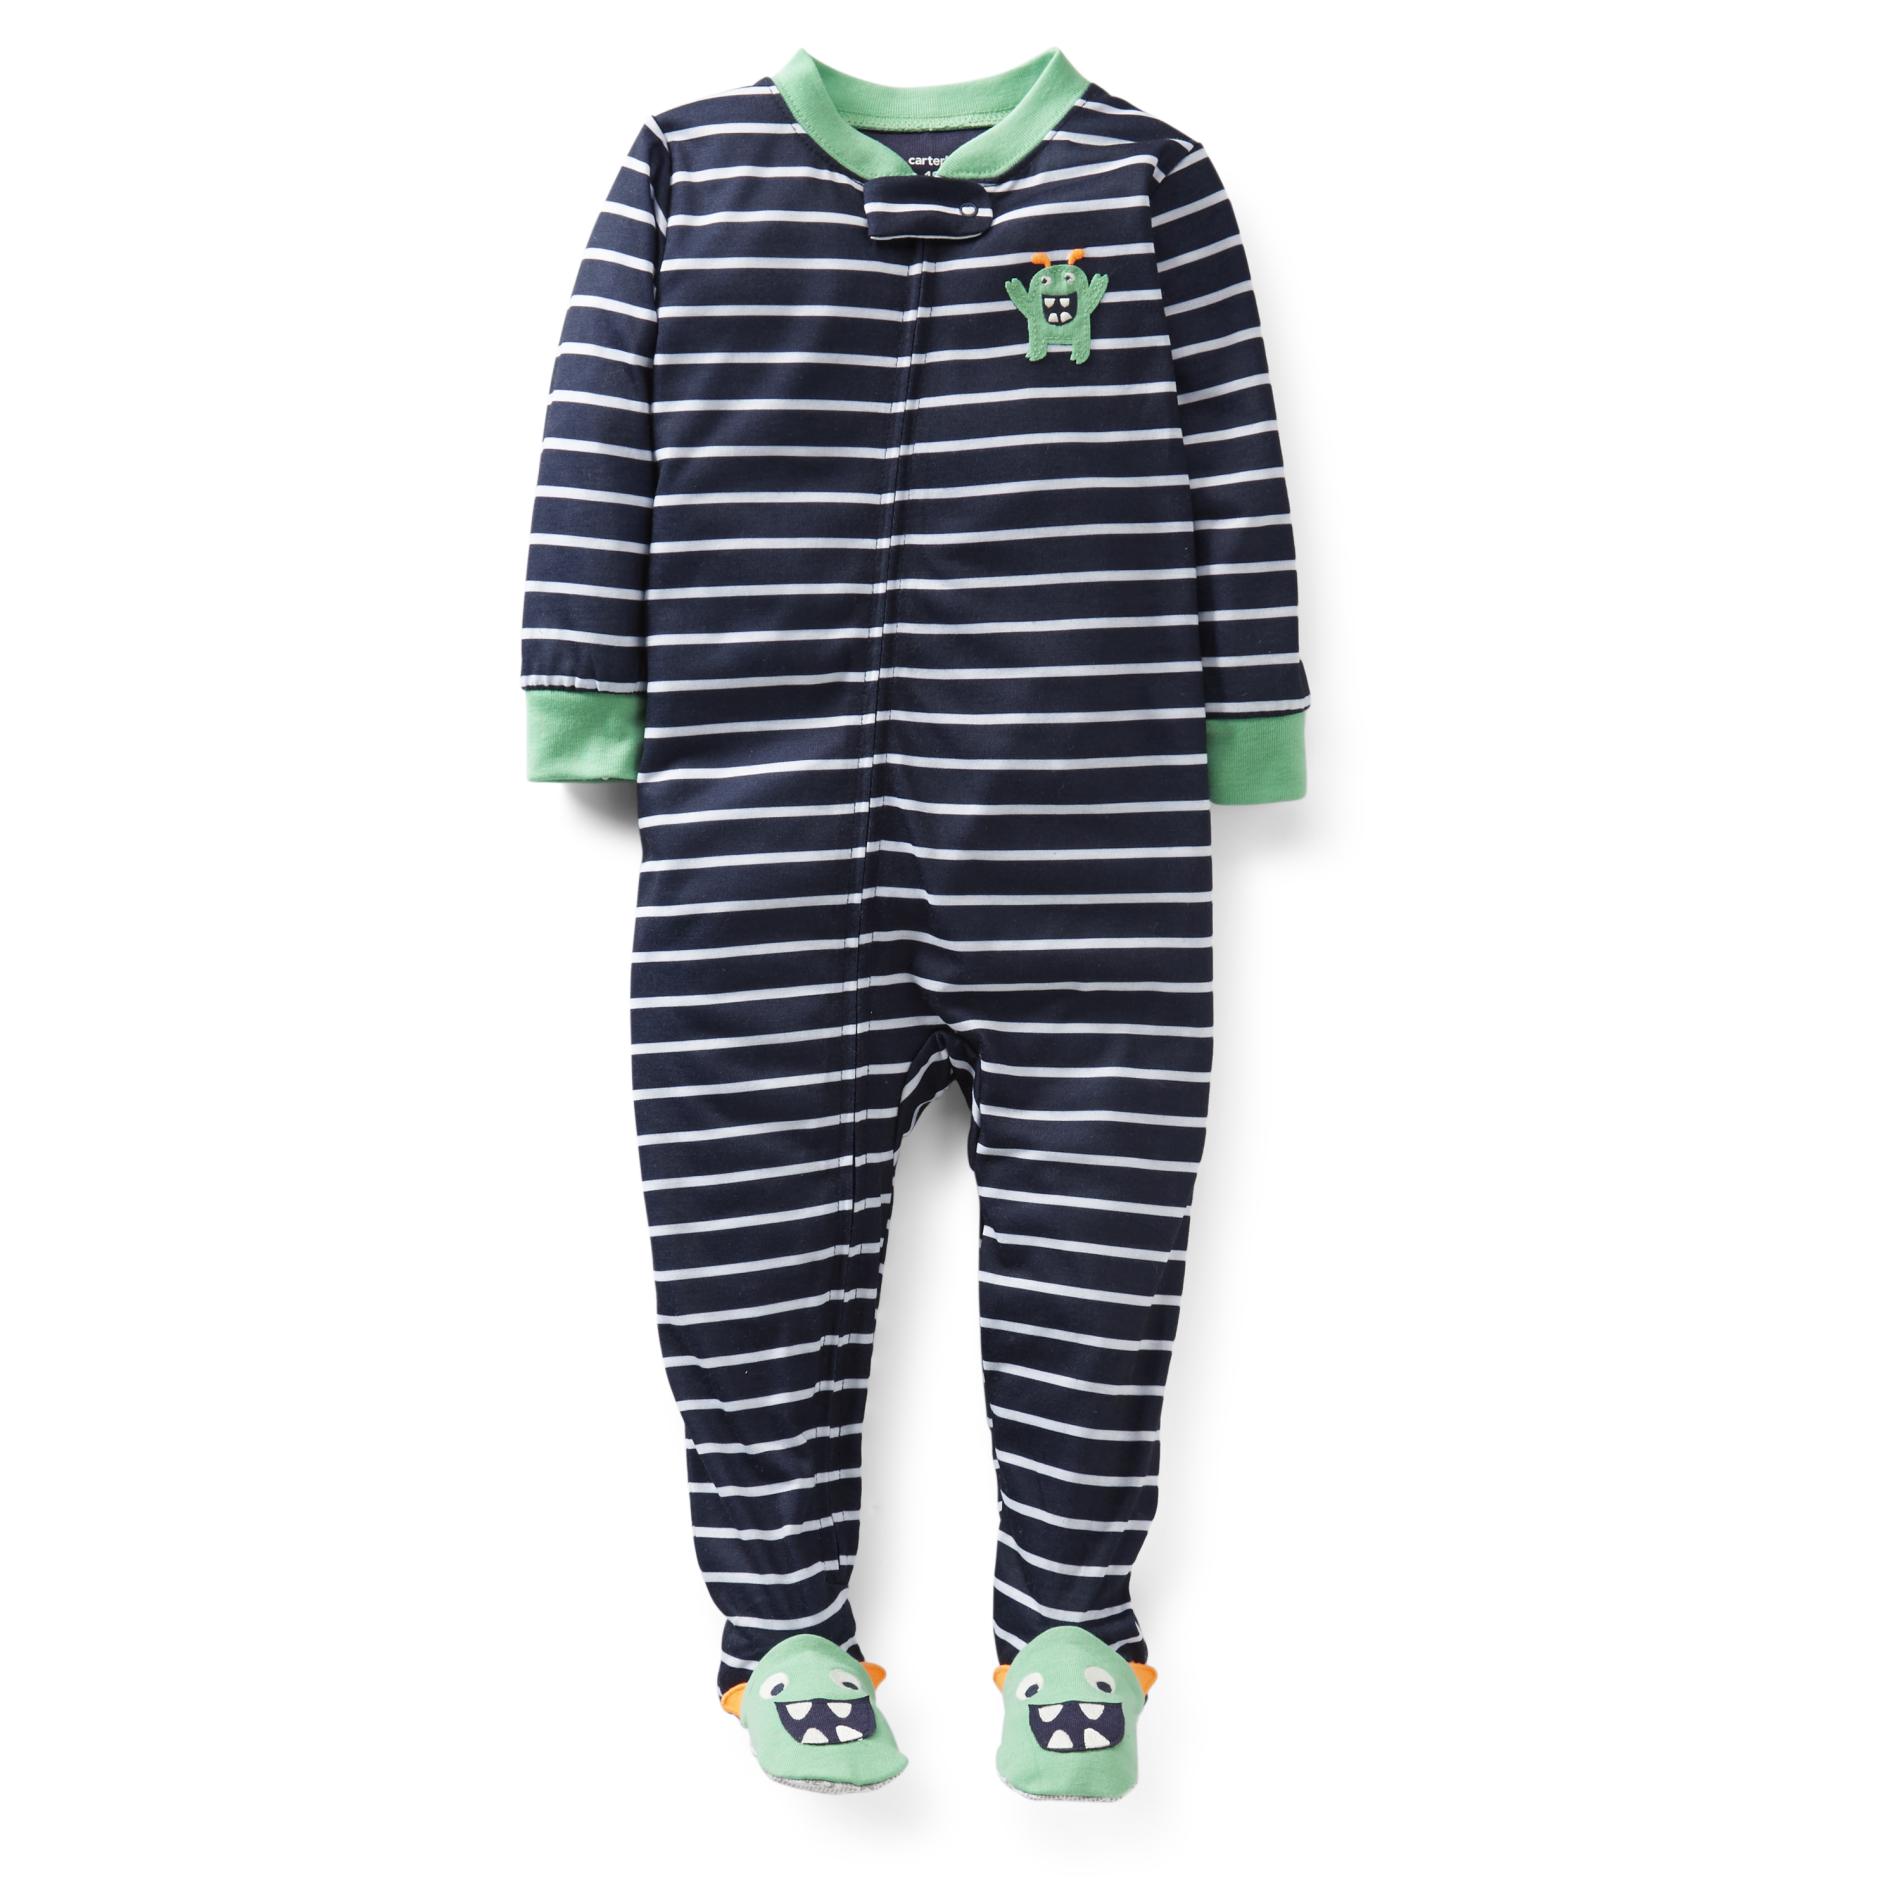 Carter's Infant & Toddler Boy's Footed Sleeper Pajamas - Monster